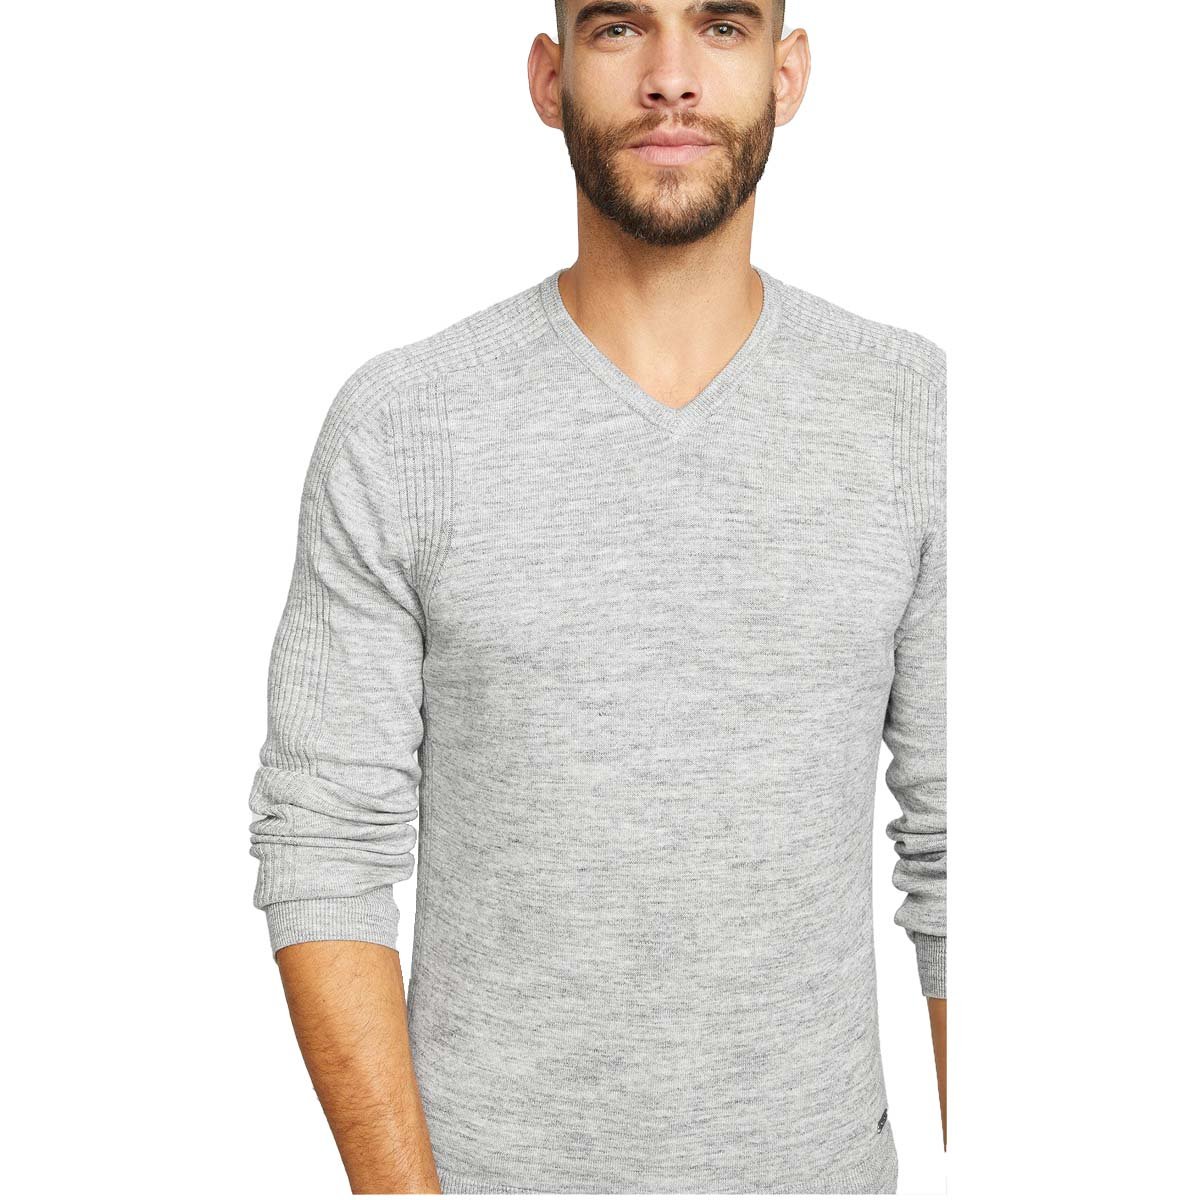 Suéter Liso Gris G By Guess para Caballero